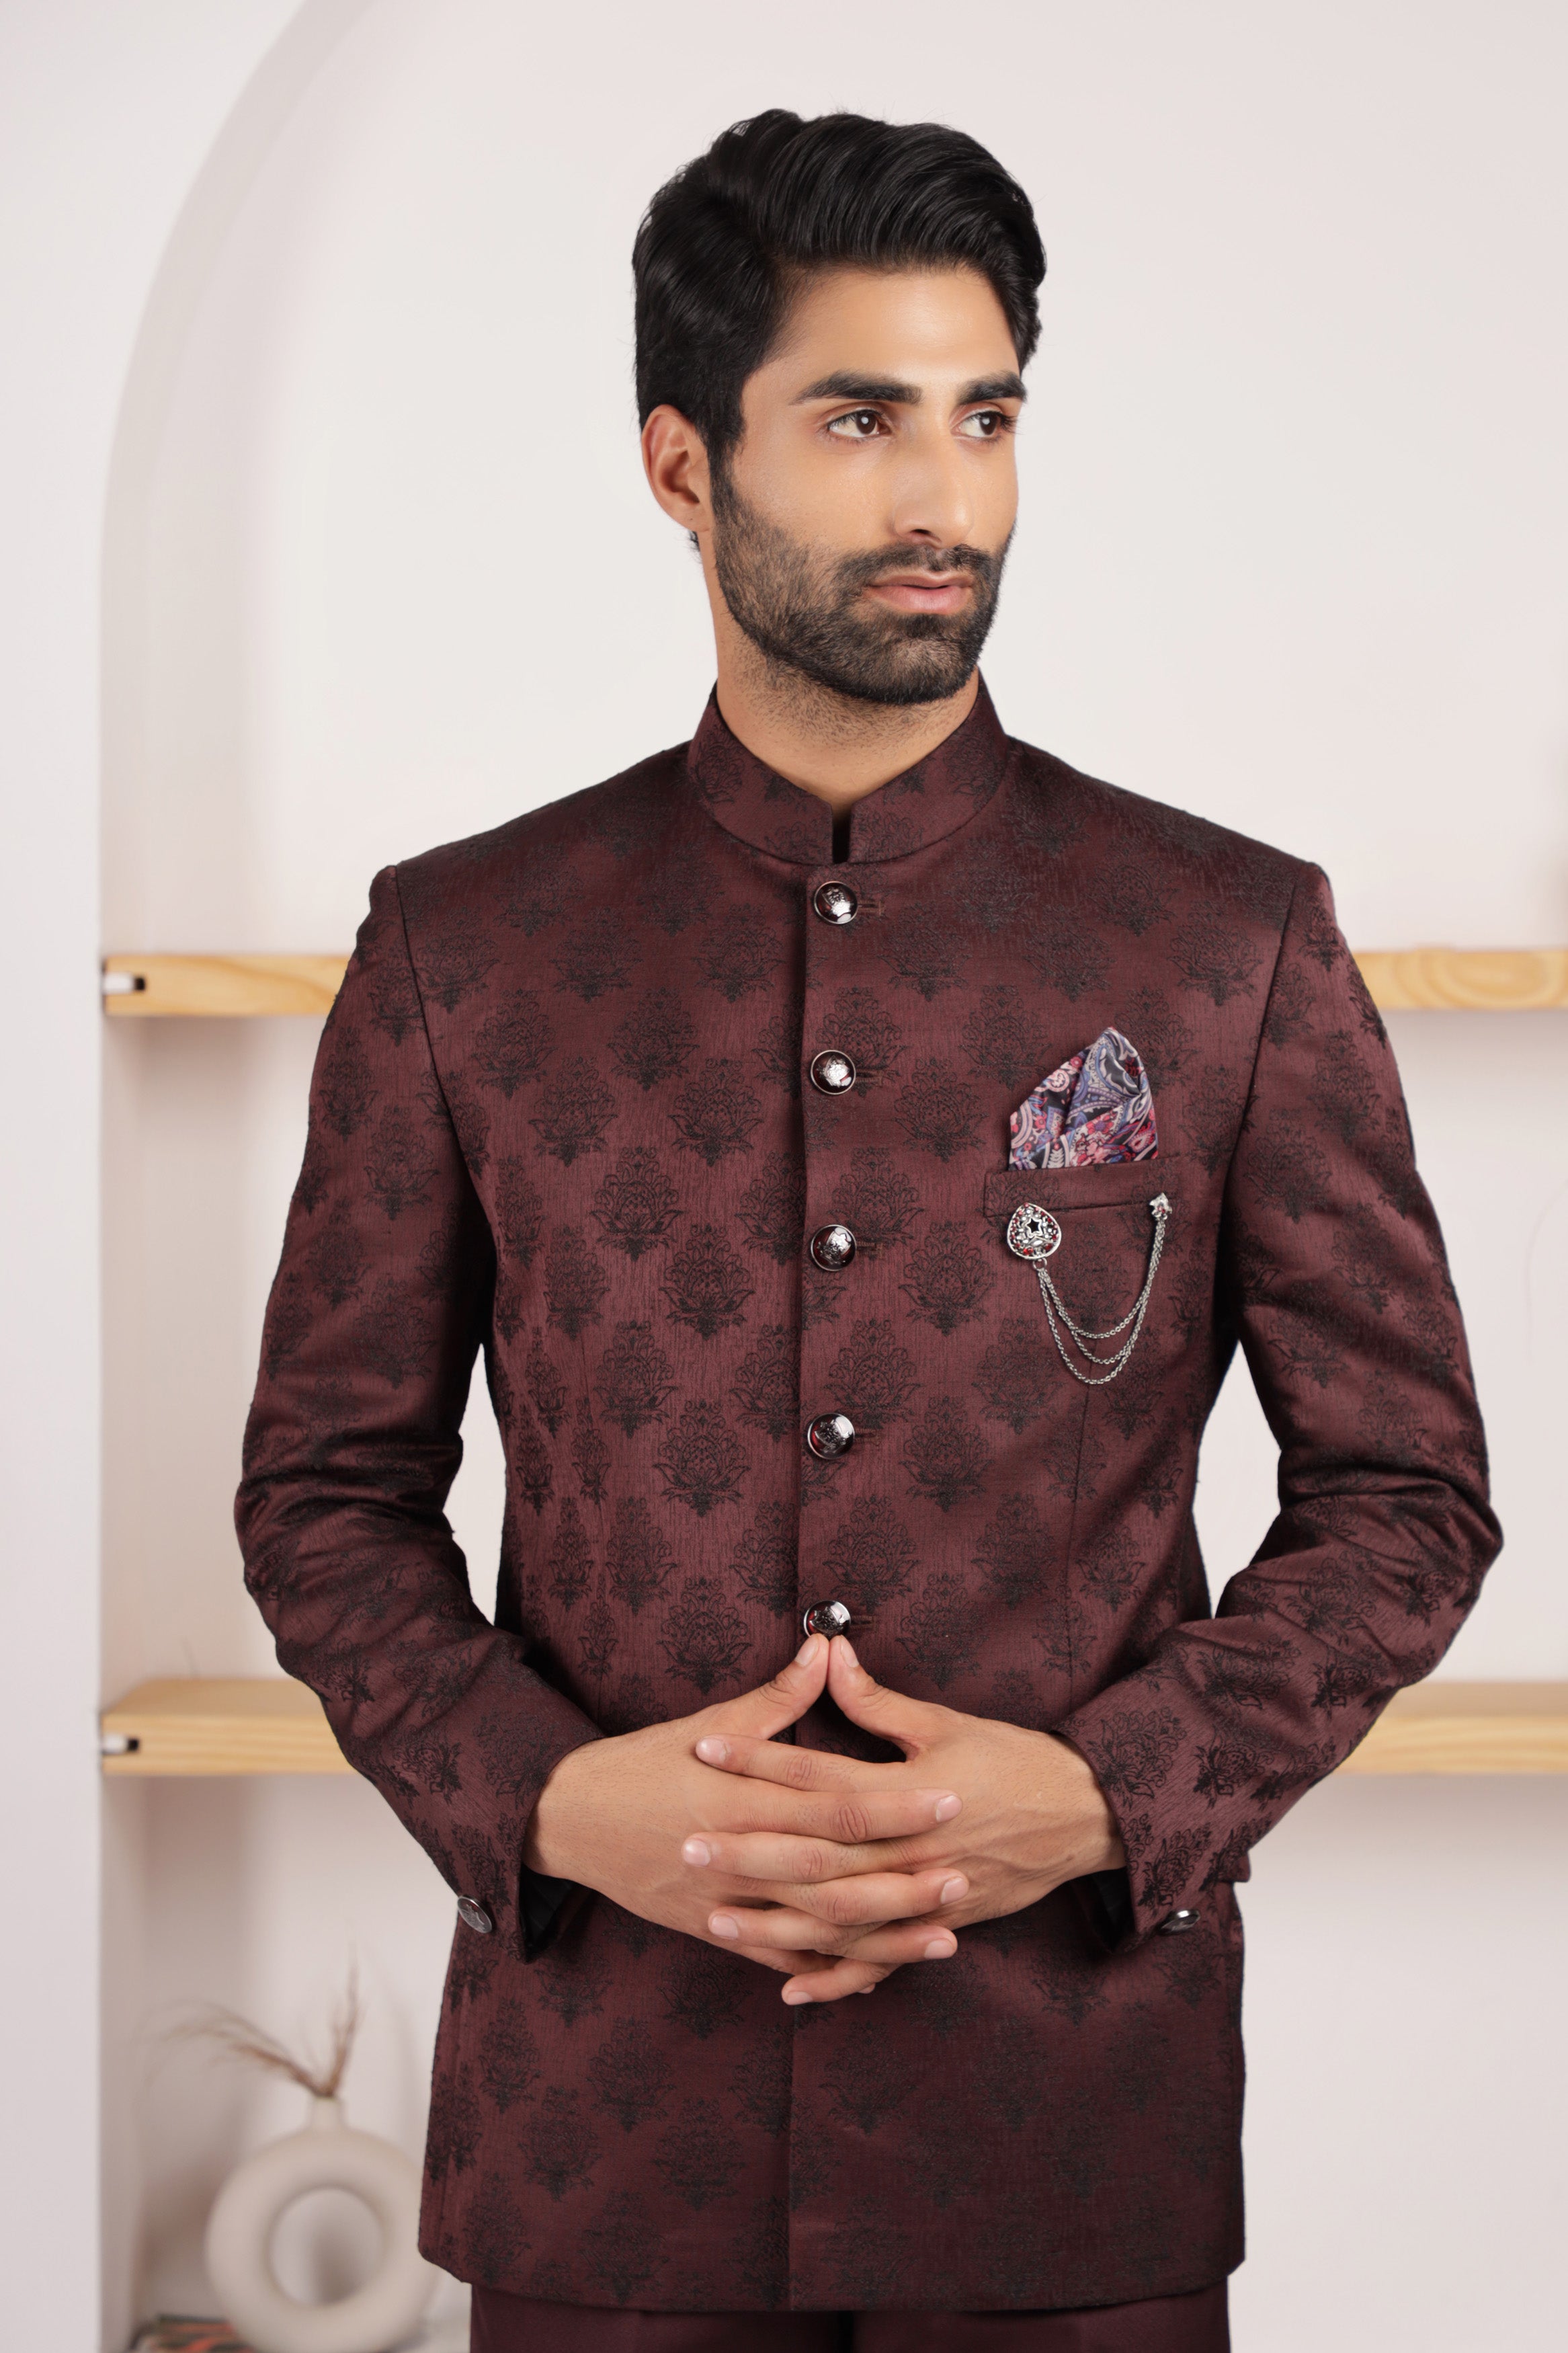 Apollo Suit #Nsh-21 color-Rust- (100% Wool) has (3 inch wide) Peak Lapel  with Pic Stitch Detailing to set this Baby off at a New Level of Style.  This Cultured Styled Suit Jacket